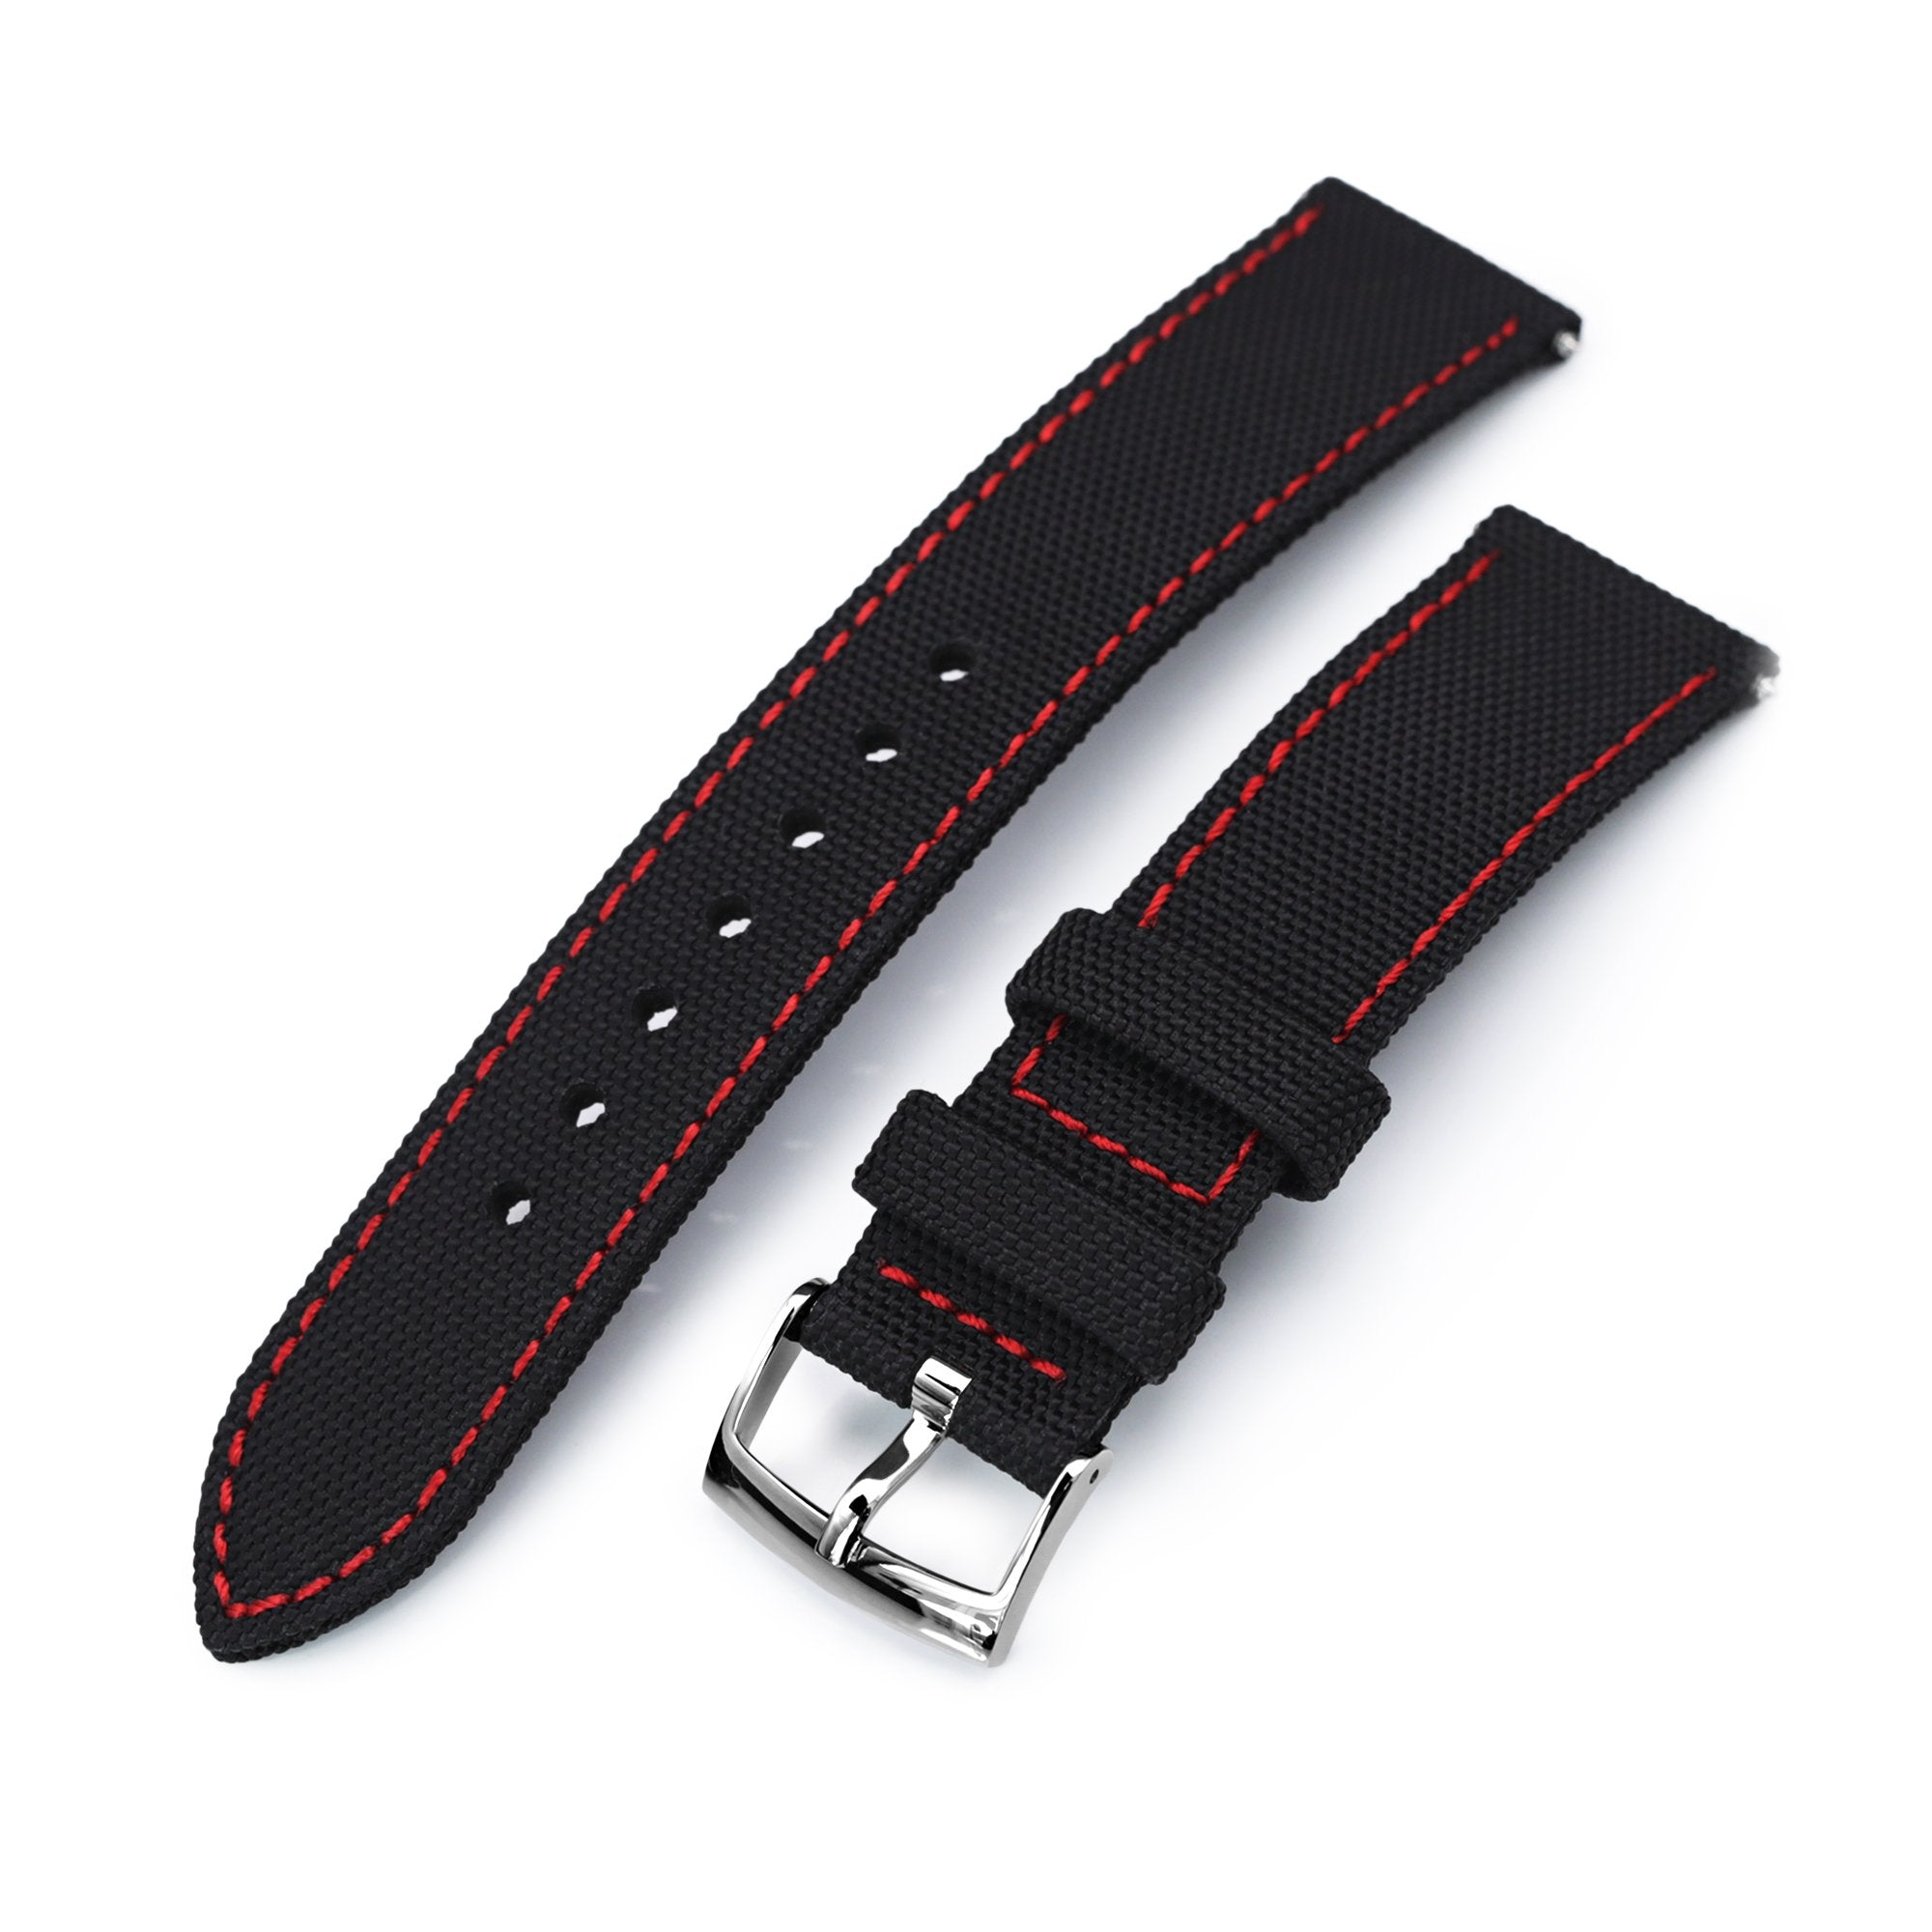 20mm Sailcloth Strap Black Quick Release Nylon Watch Band, Red Stitching Strapcode Watch Bands